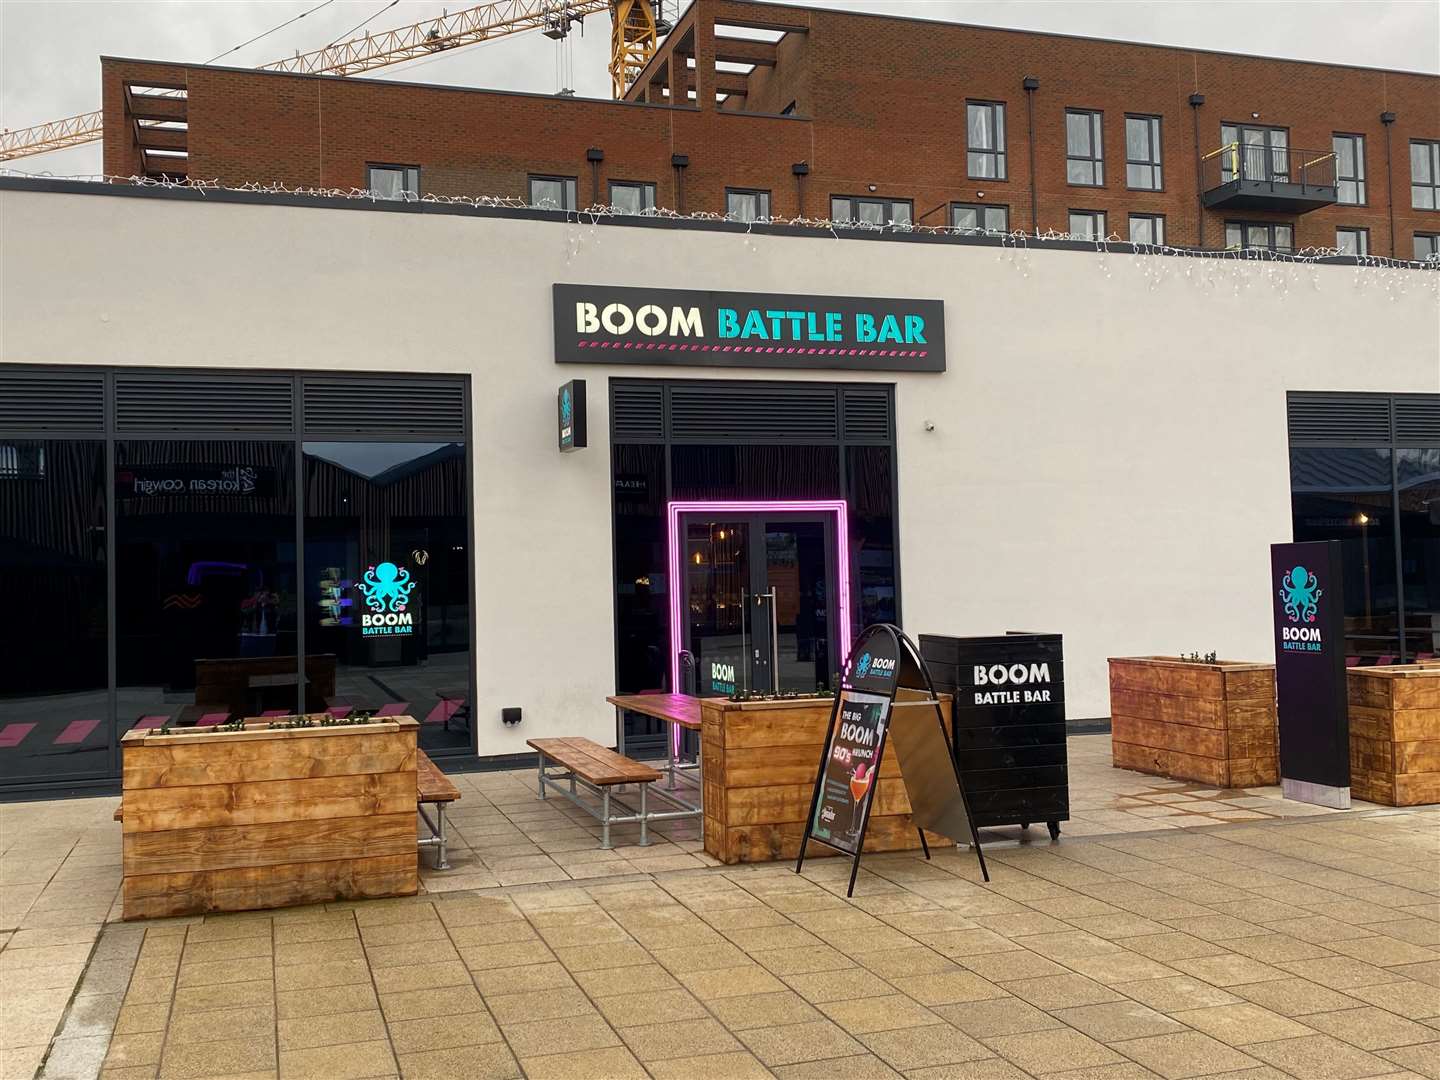 Boom Battle Bar on the Riverside complex in Canterbury